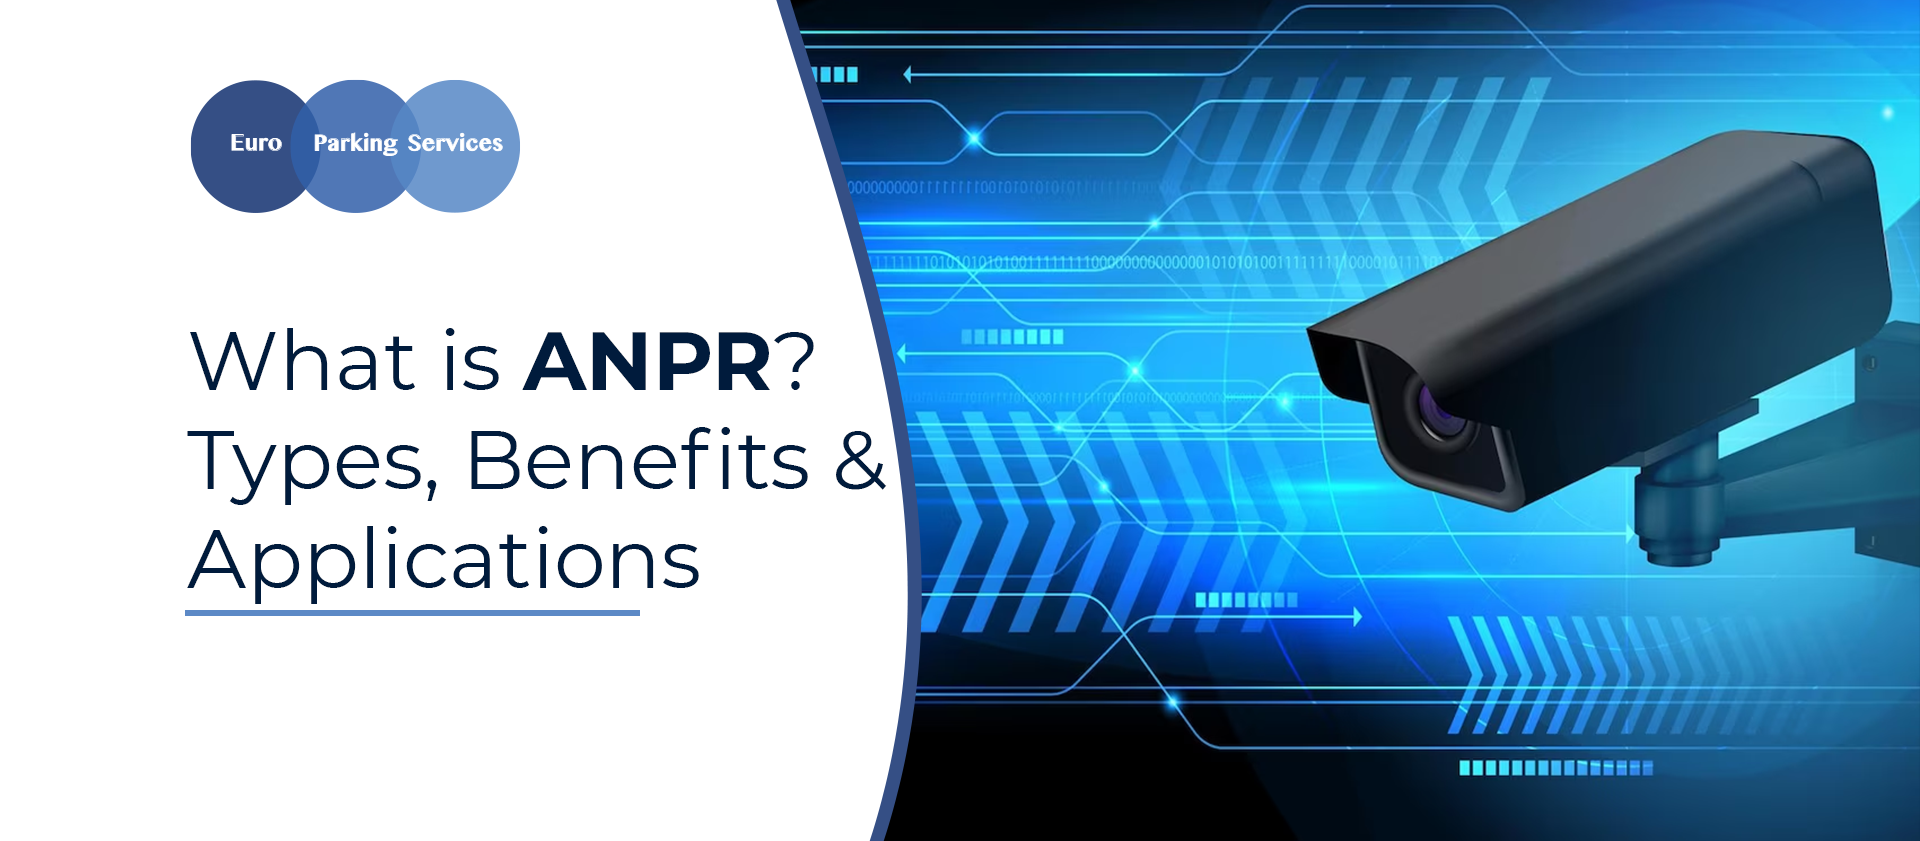 What is ANPR? Types, Benefits & Applications